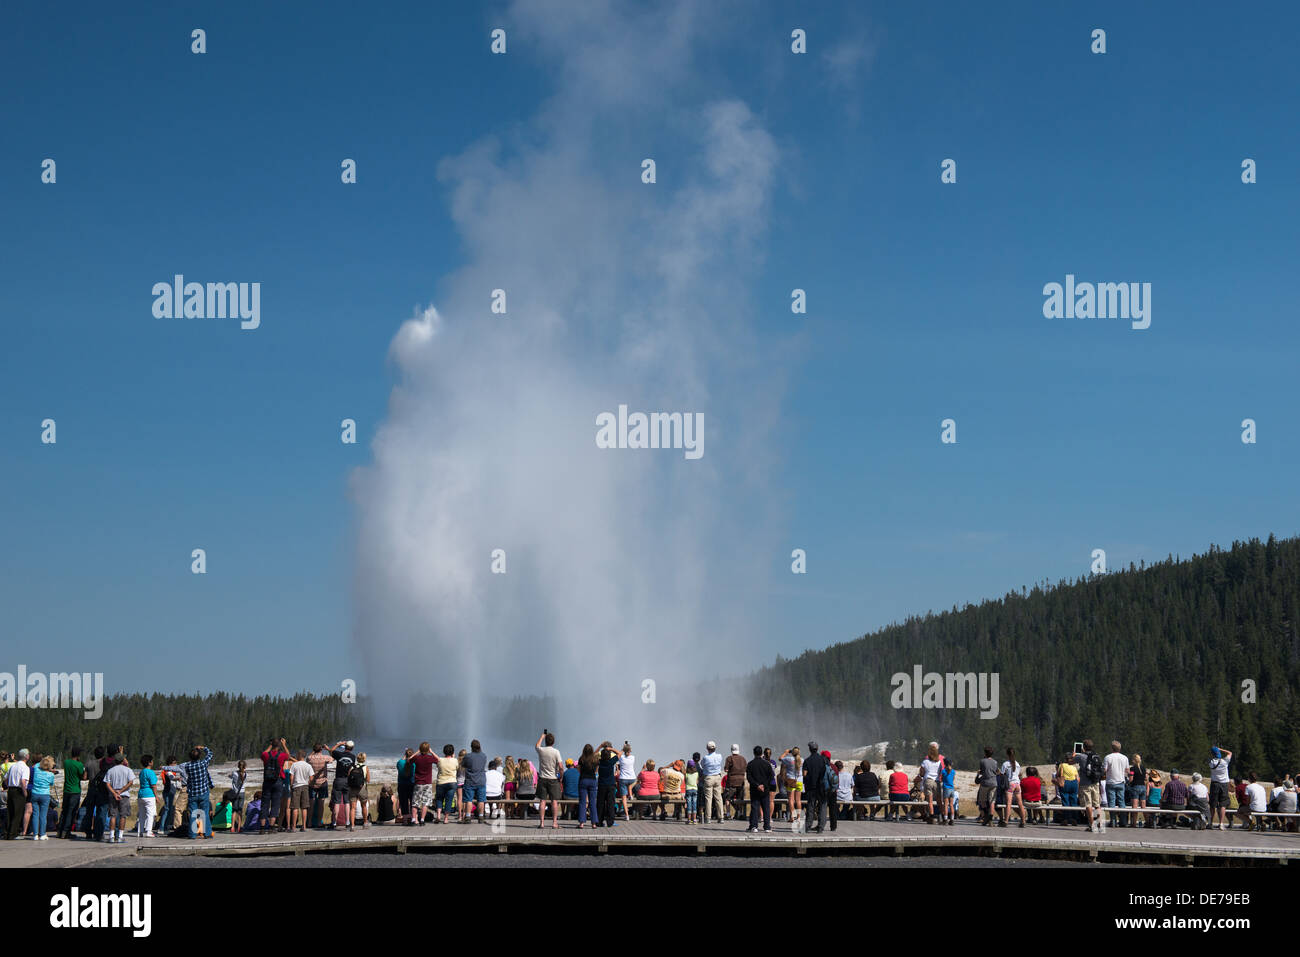 Photograph of a group of people enjoying an eruption of Yellowstone's Old Faithful Geyser. Stock Photo